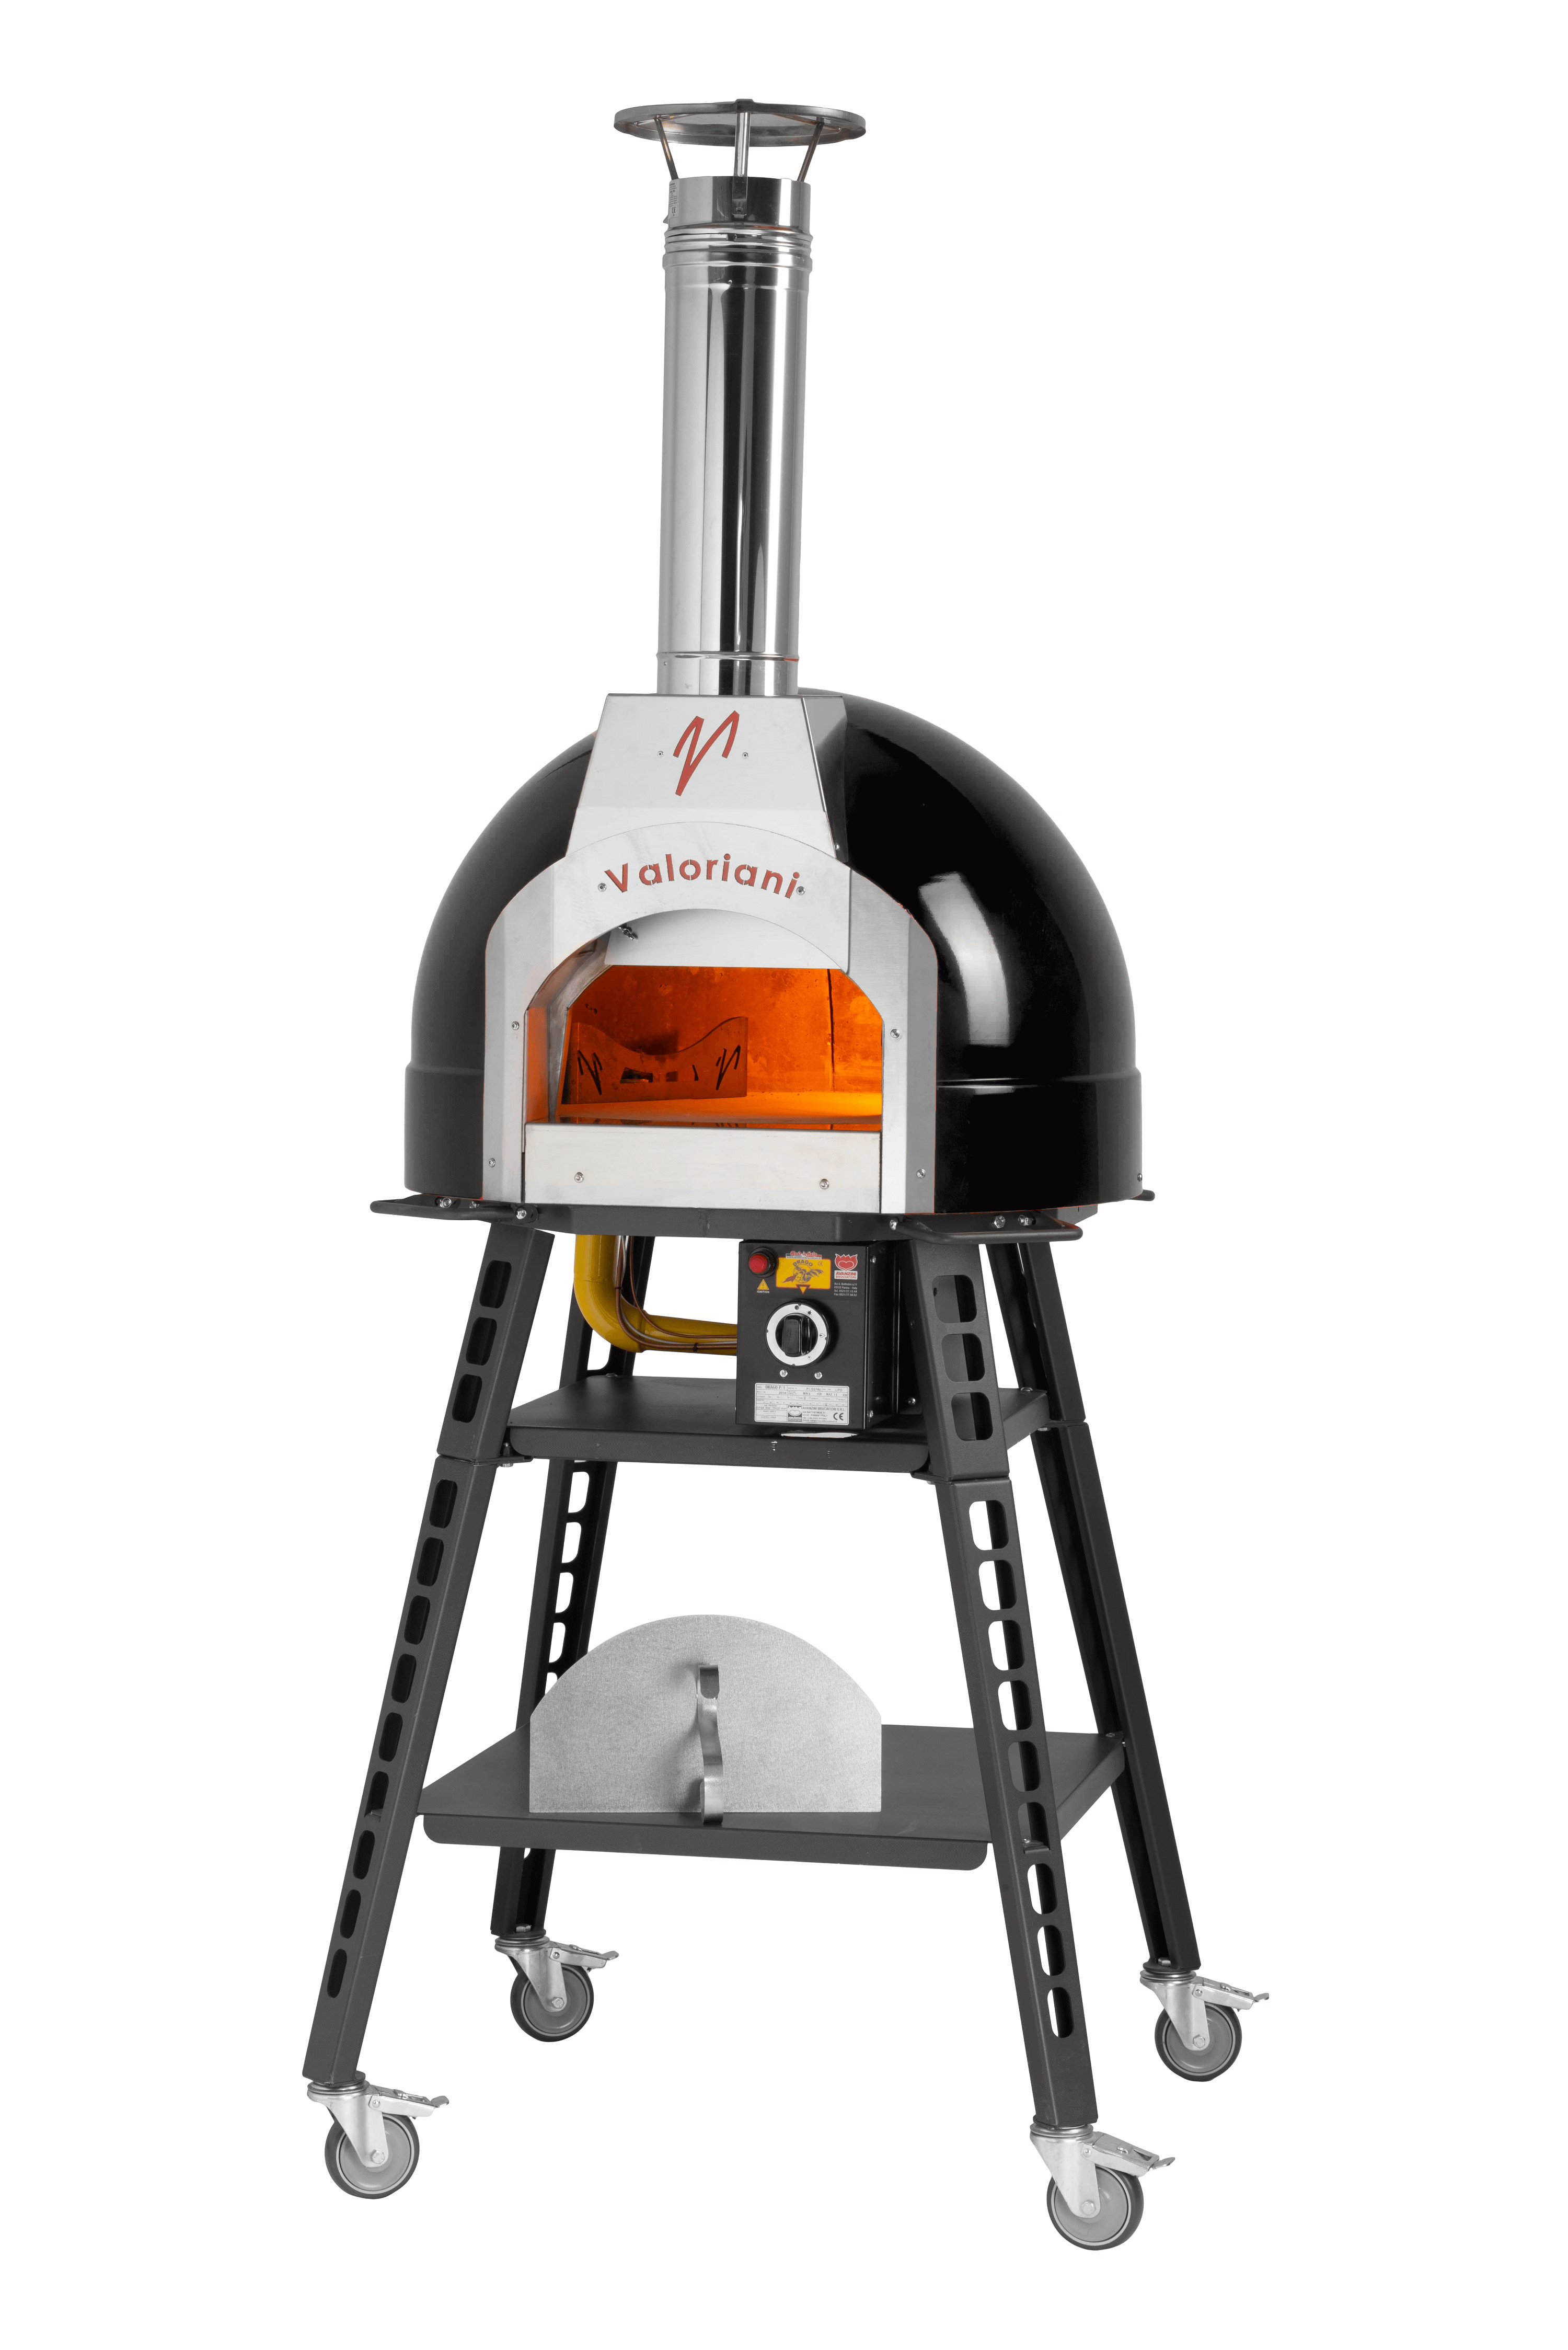 Valoriani Baby: pizza oven with gas firing and 60cm diameter, incl. complete base, black.